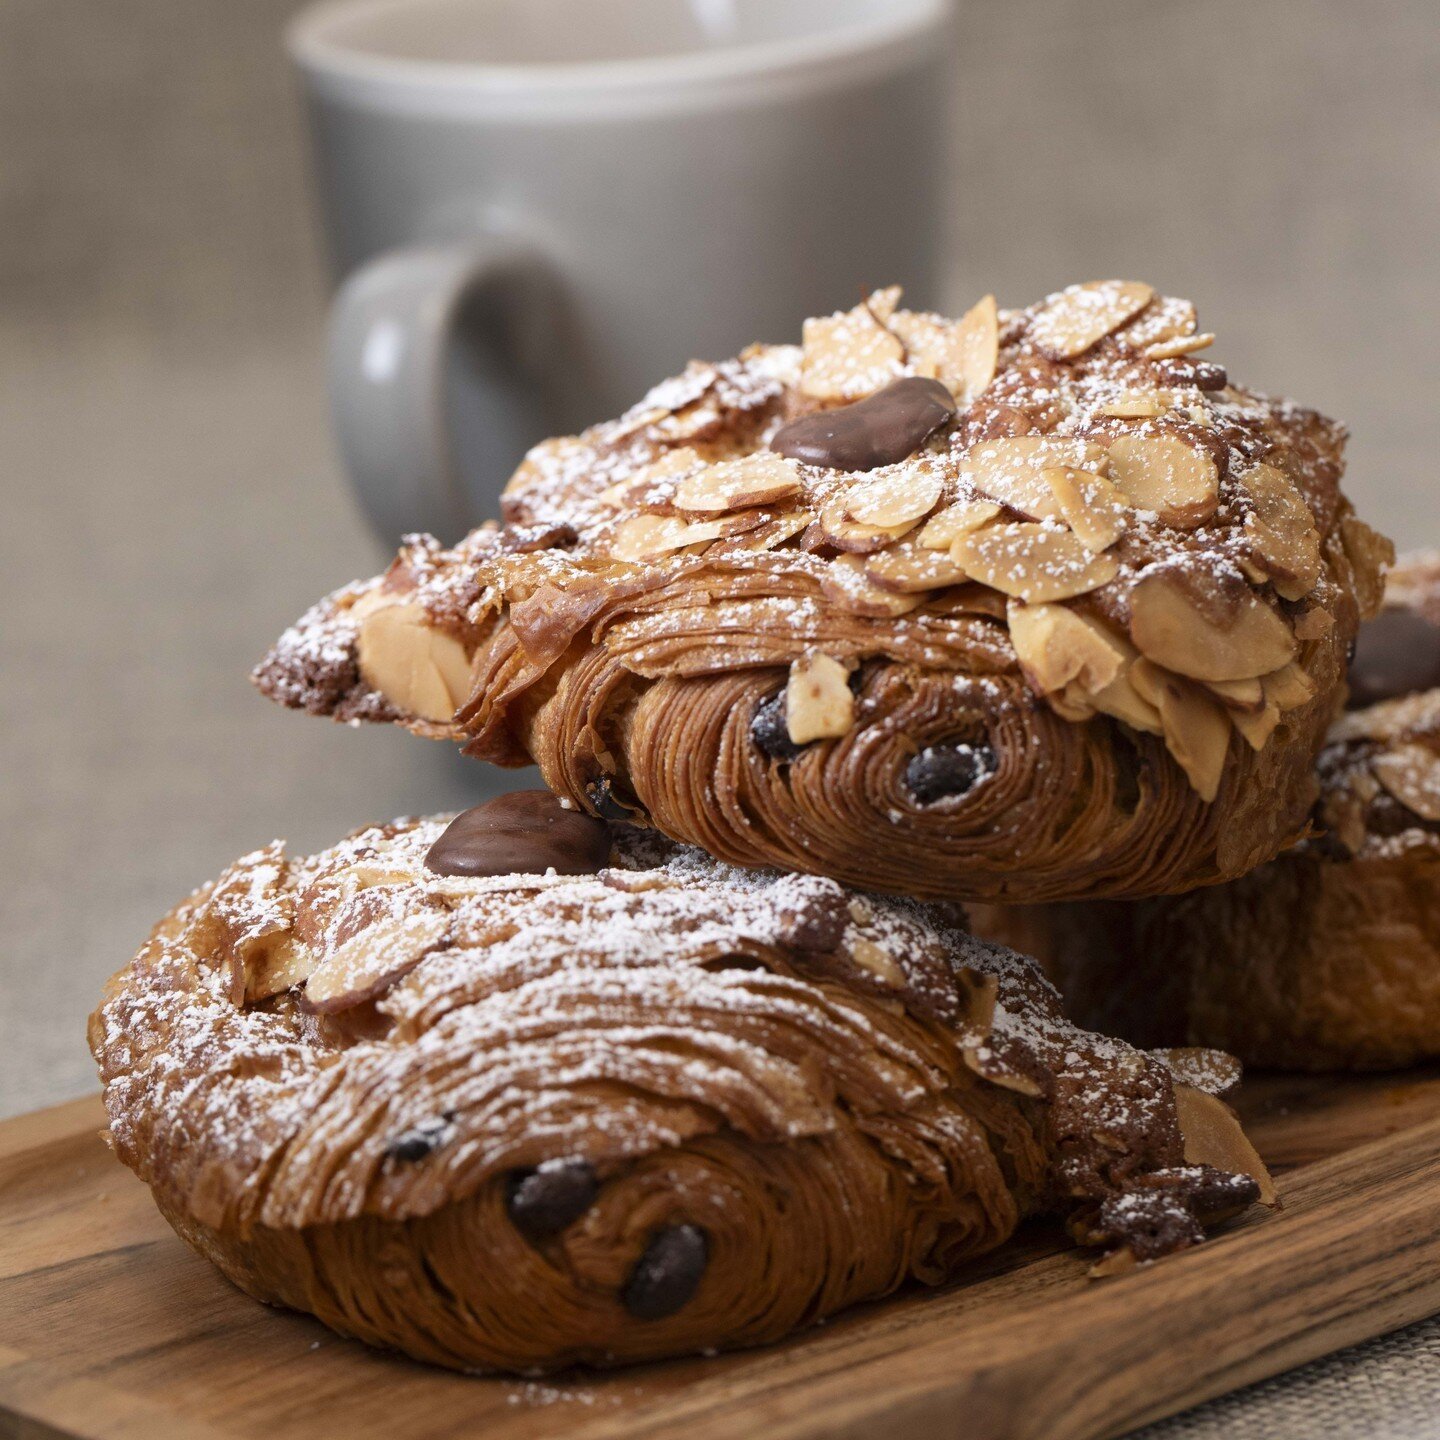 If you&rsquo;re looking for a boost to get you through the week, our Chocolate Almond Croissant and a cup of freshly brewed coffee may be just what you need.